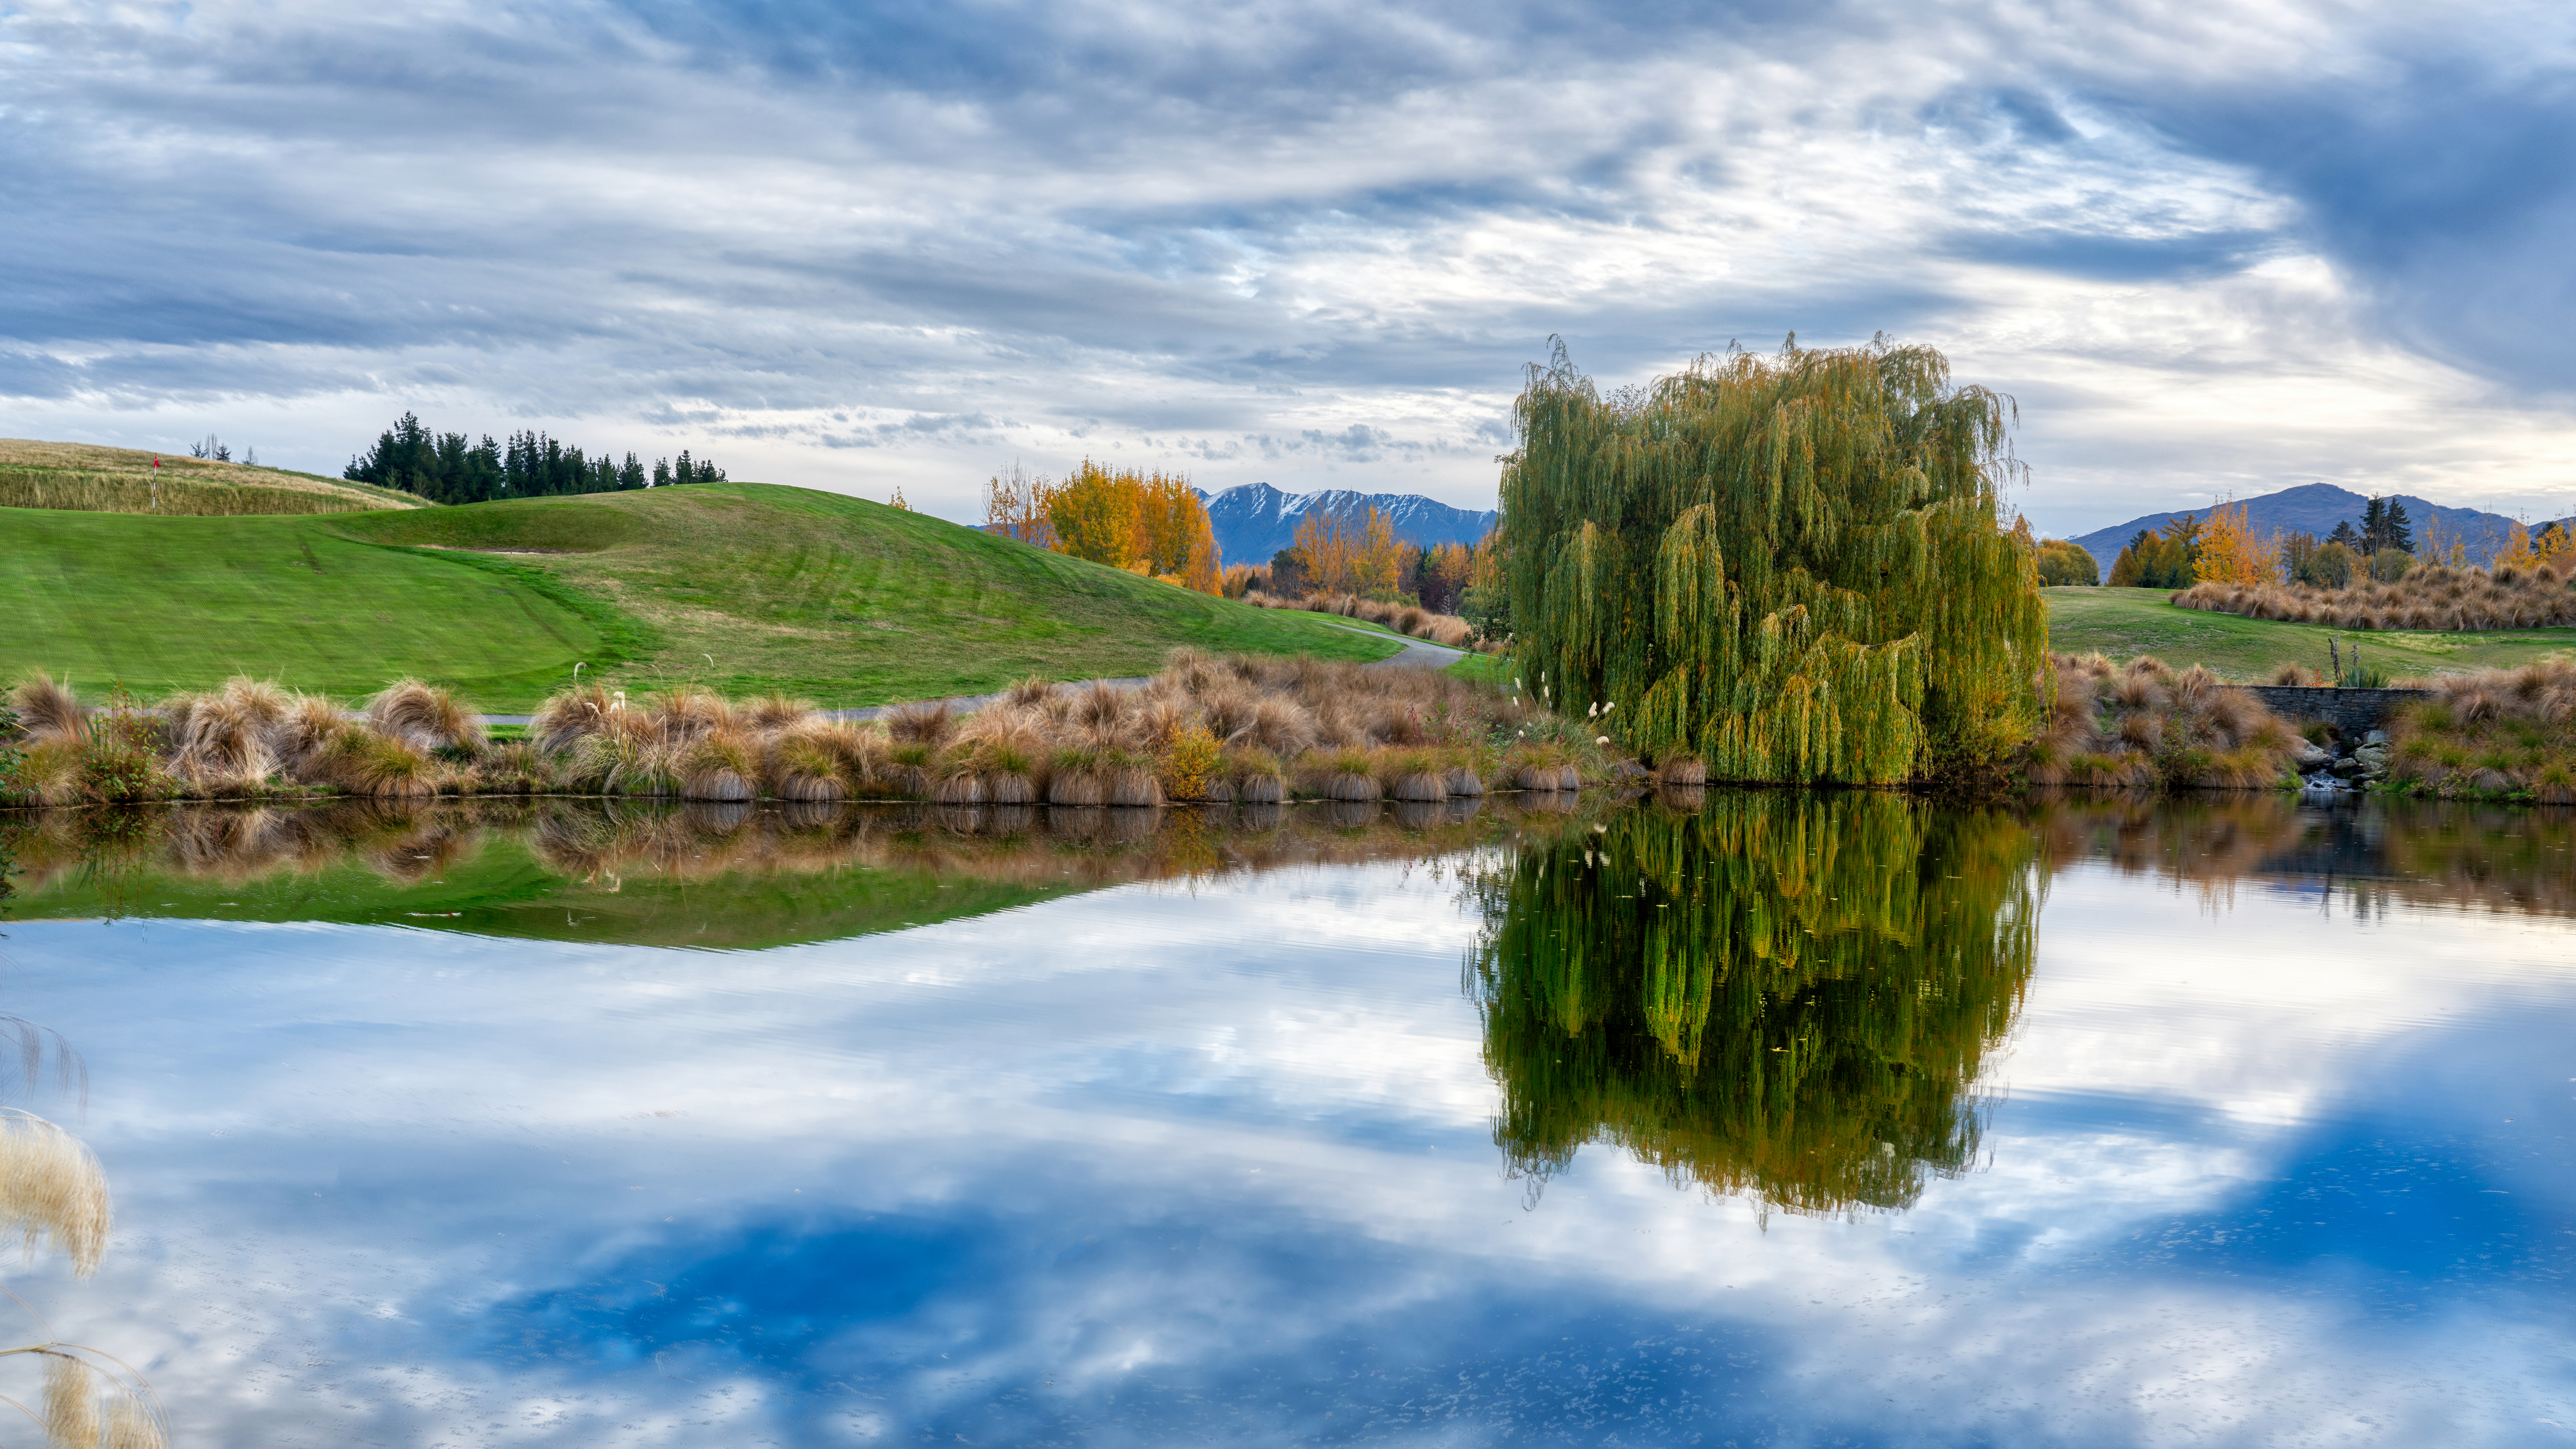 General 7680x4320 Trey Ratcliff water reflection mountains New Zealand